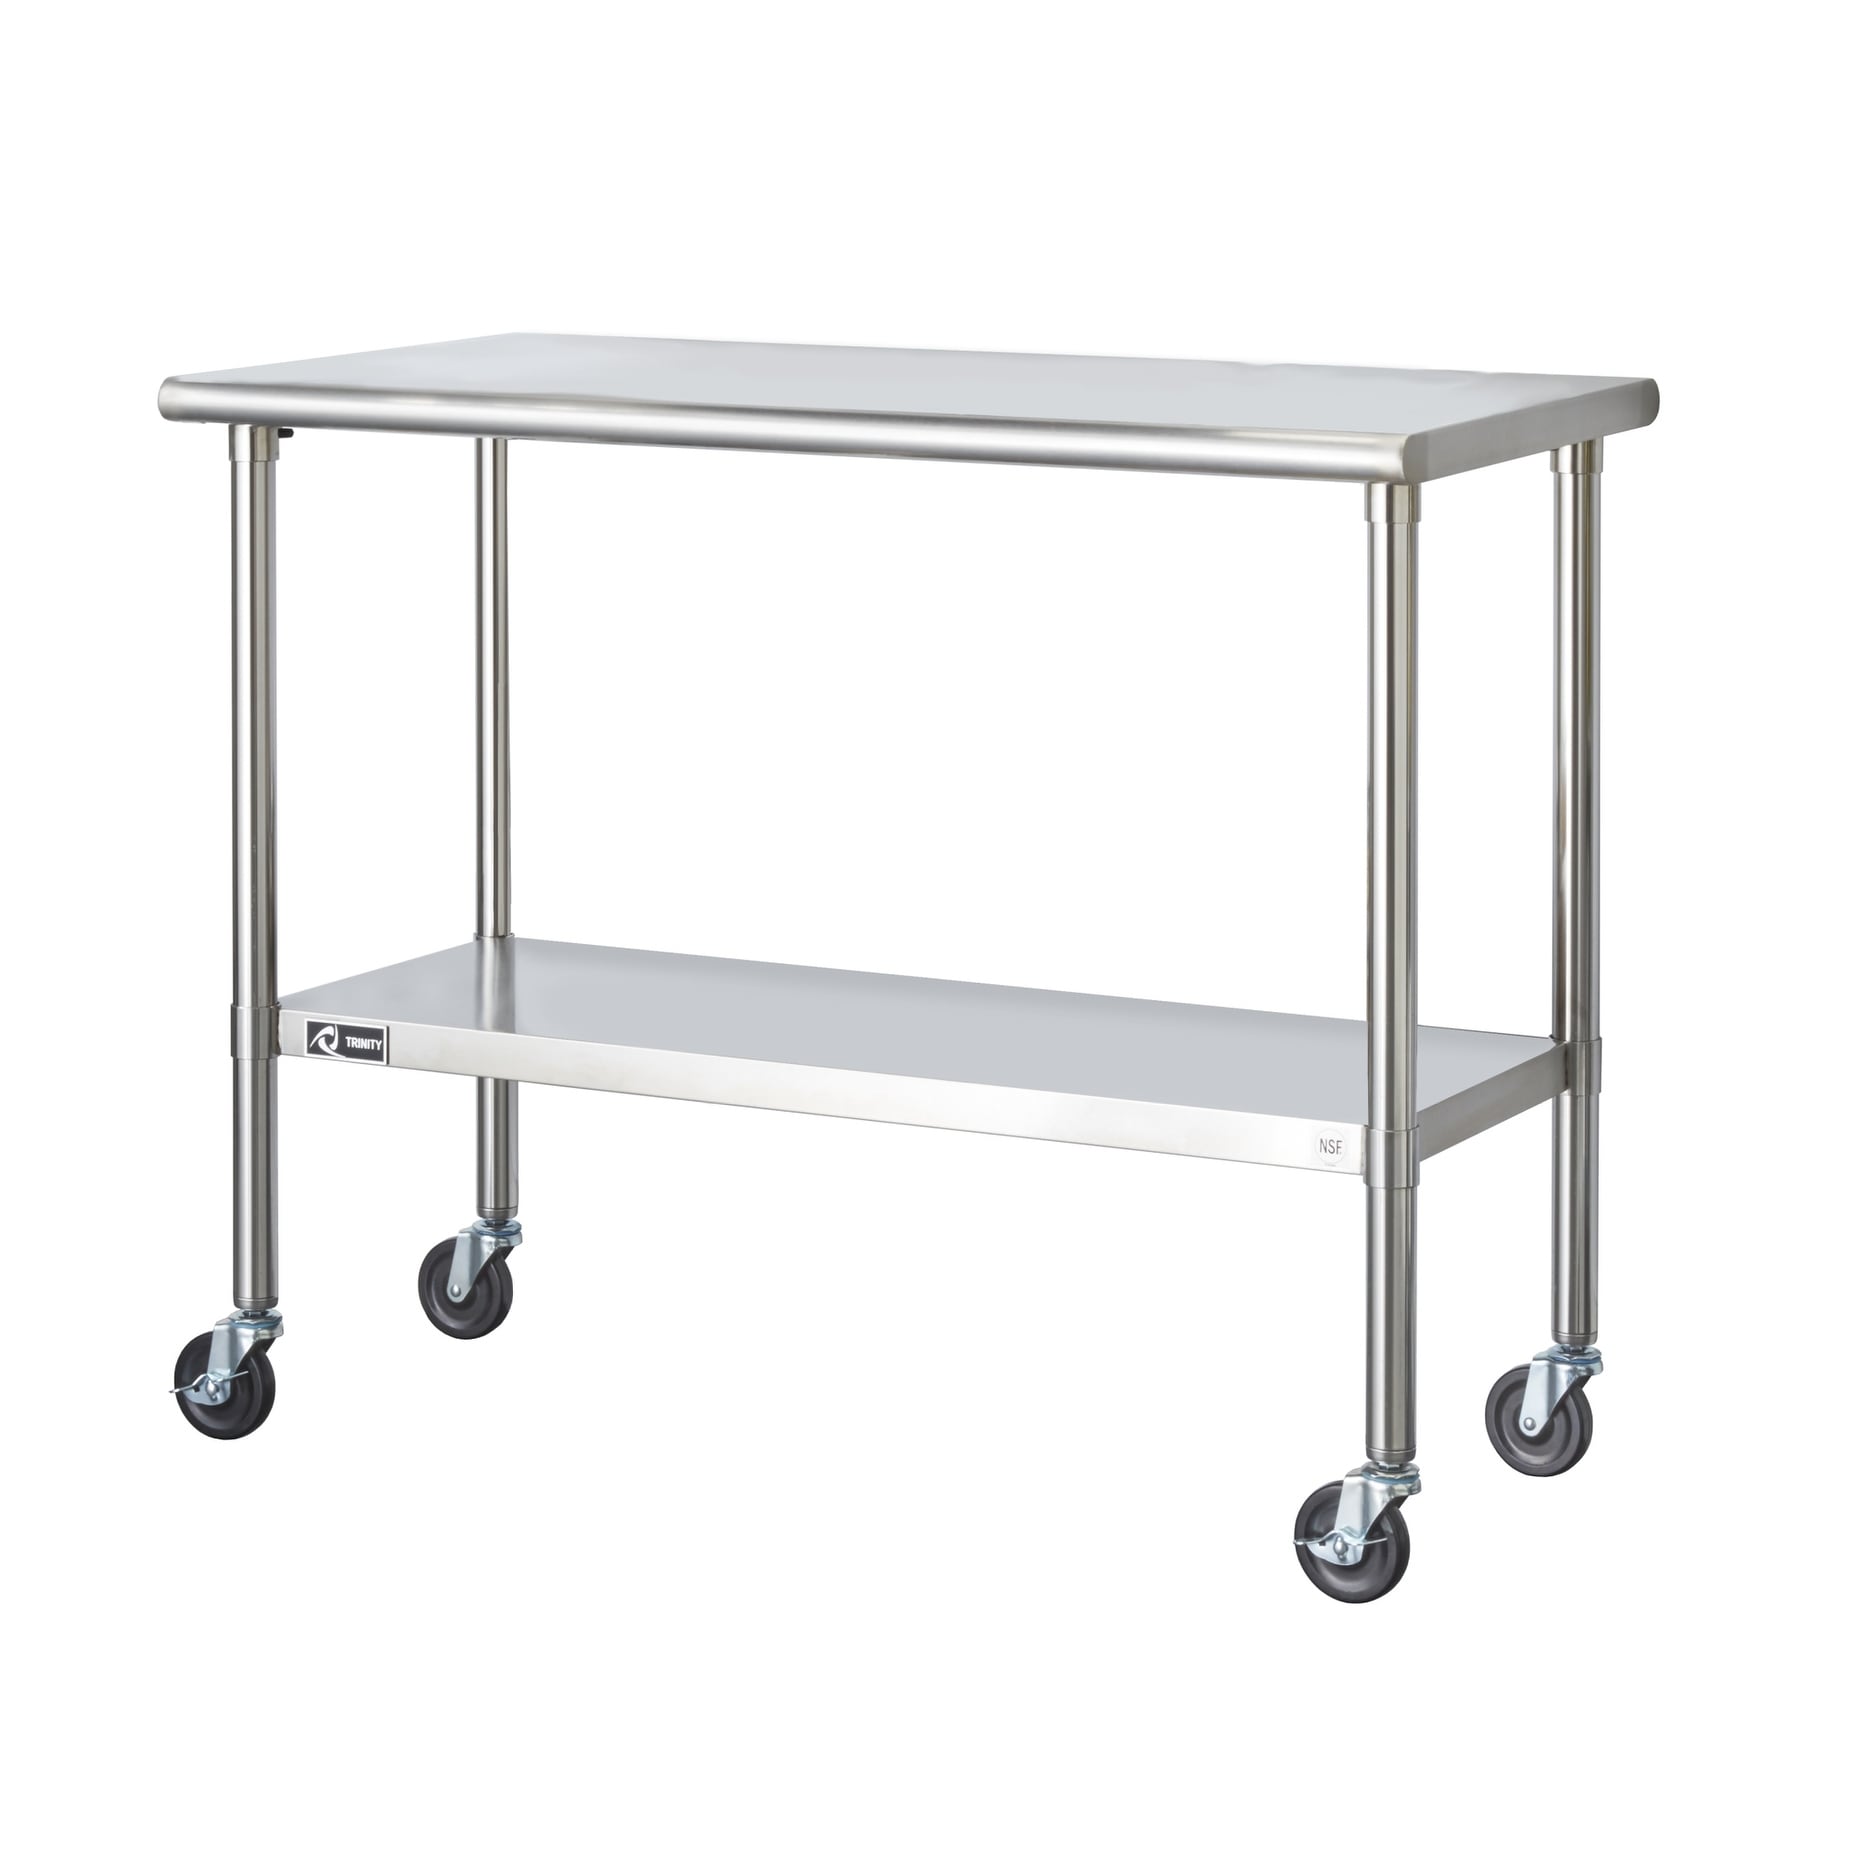 Seville Classics Ultragraphite Wood Top Workbench on Wheels - Bed